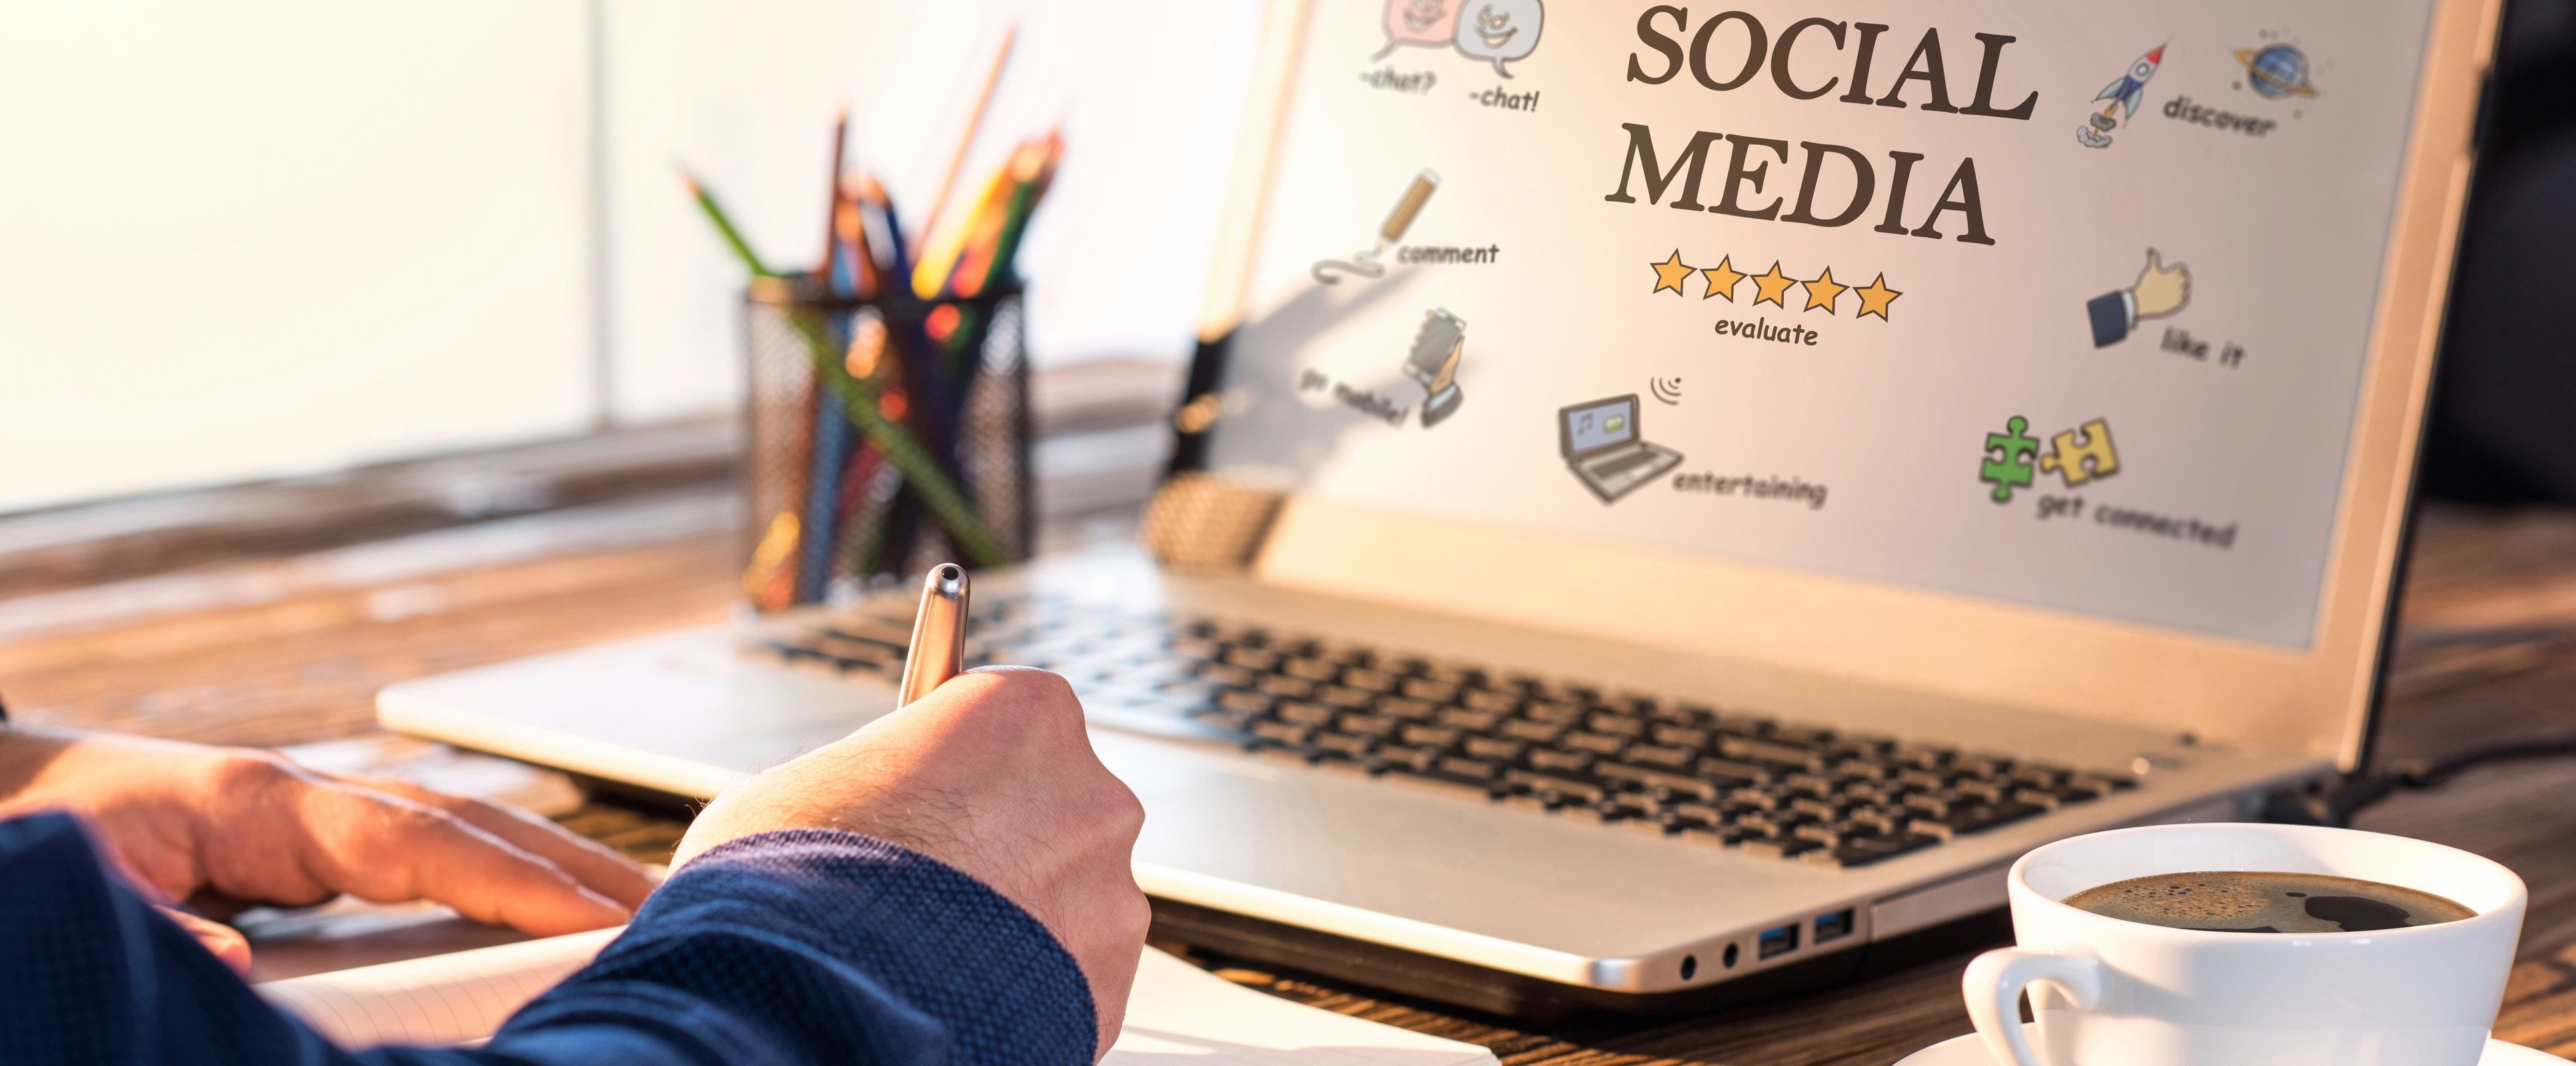 Copywriting for Social Media: What You Need to Know 